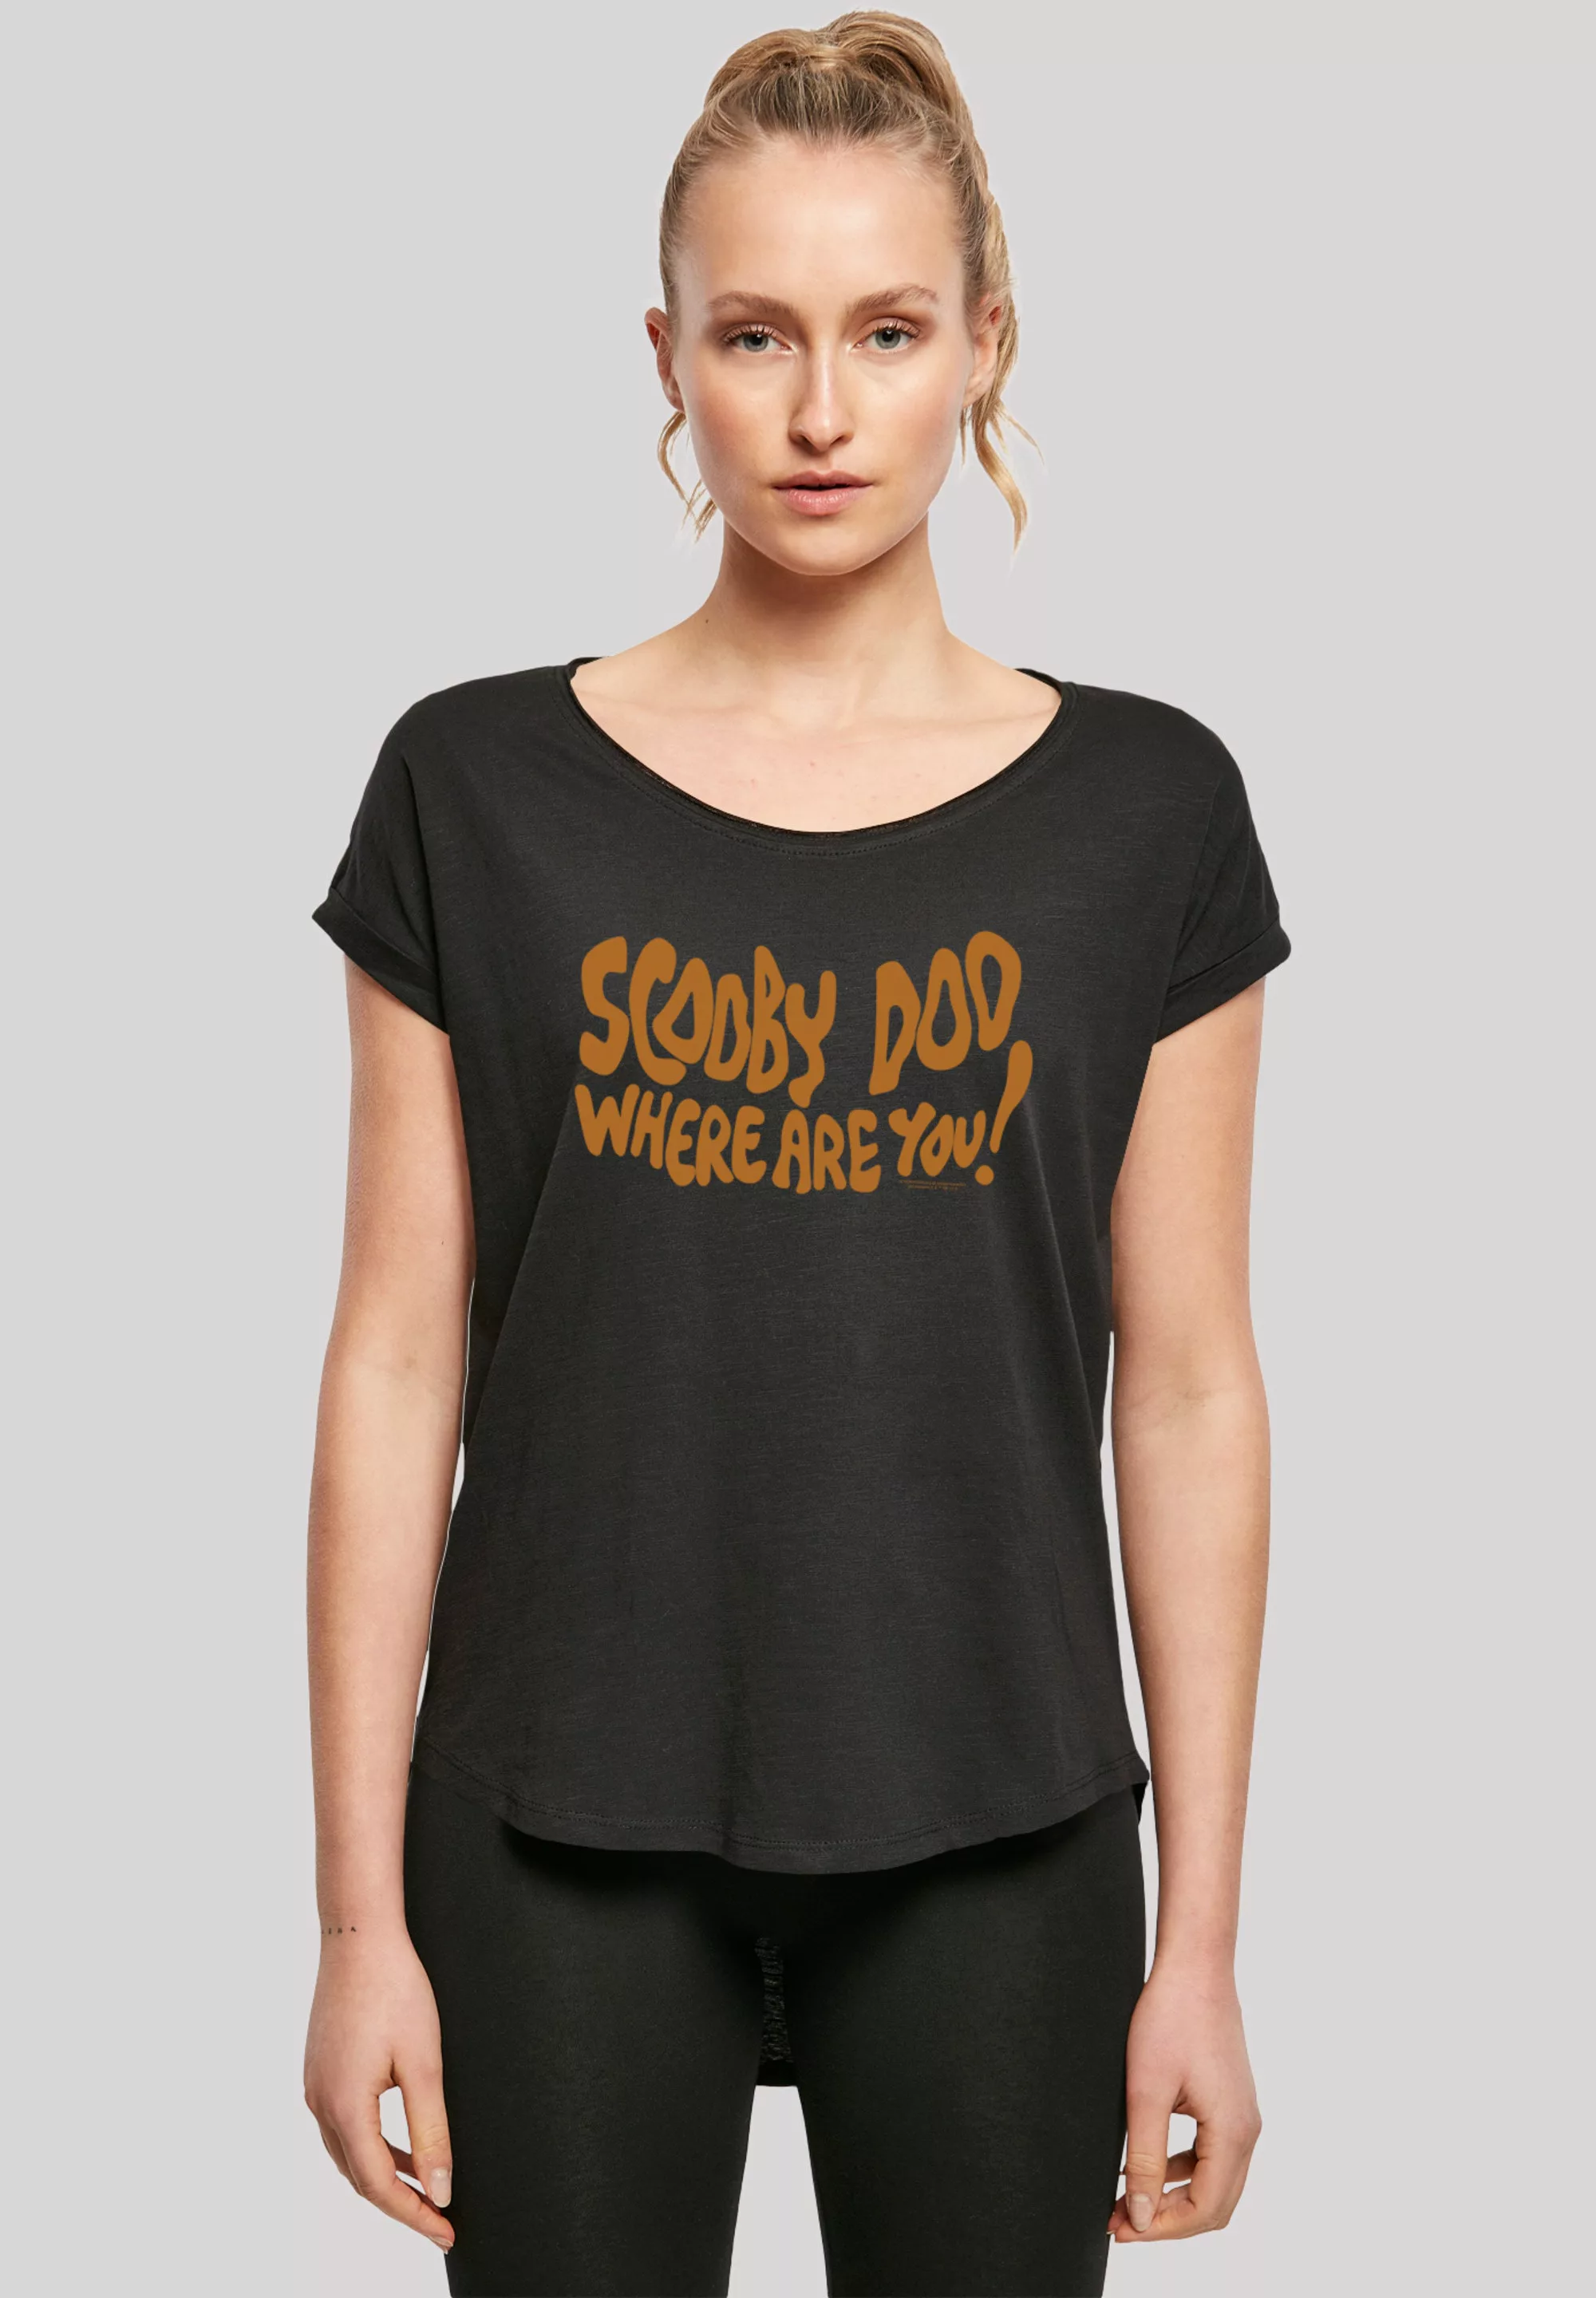 F4NT4STIC T-Shirt "Scooby Doo Where Are You Spooky", Print günstig online kaufen